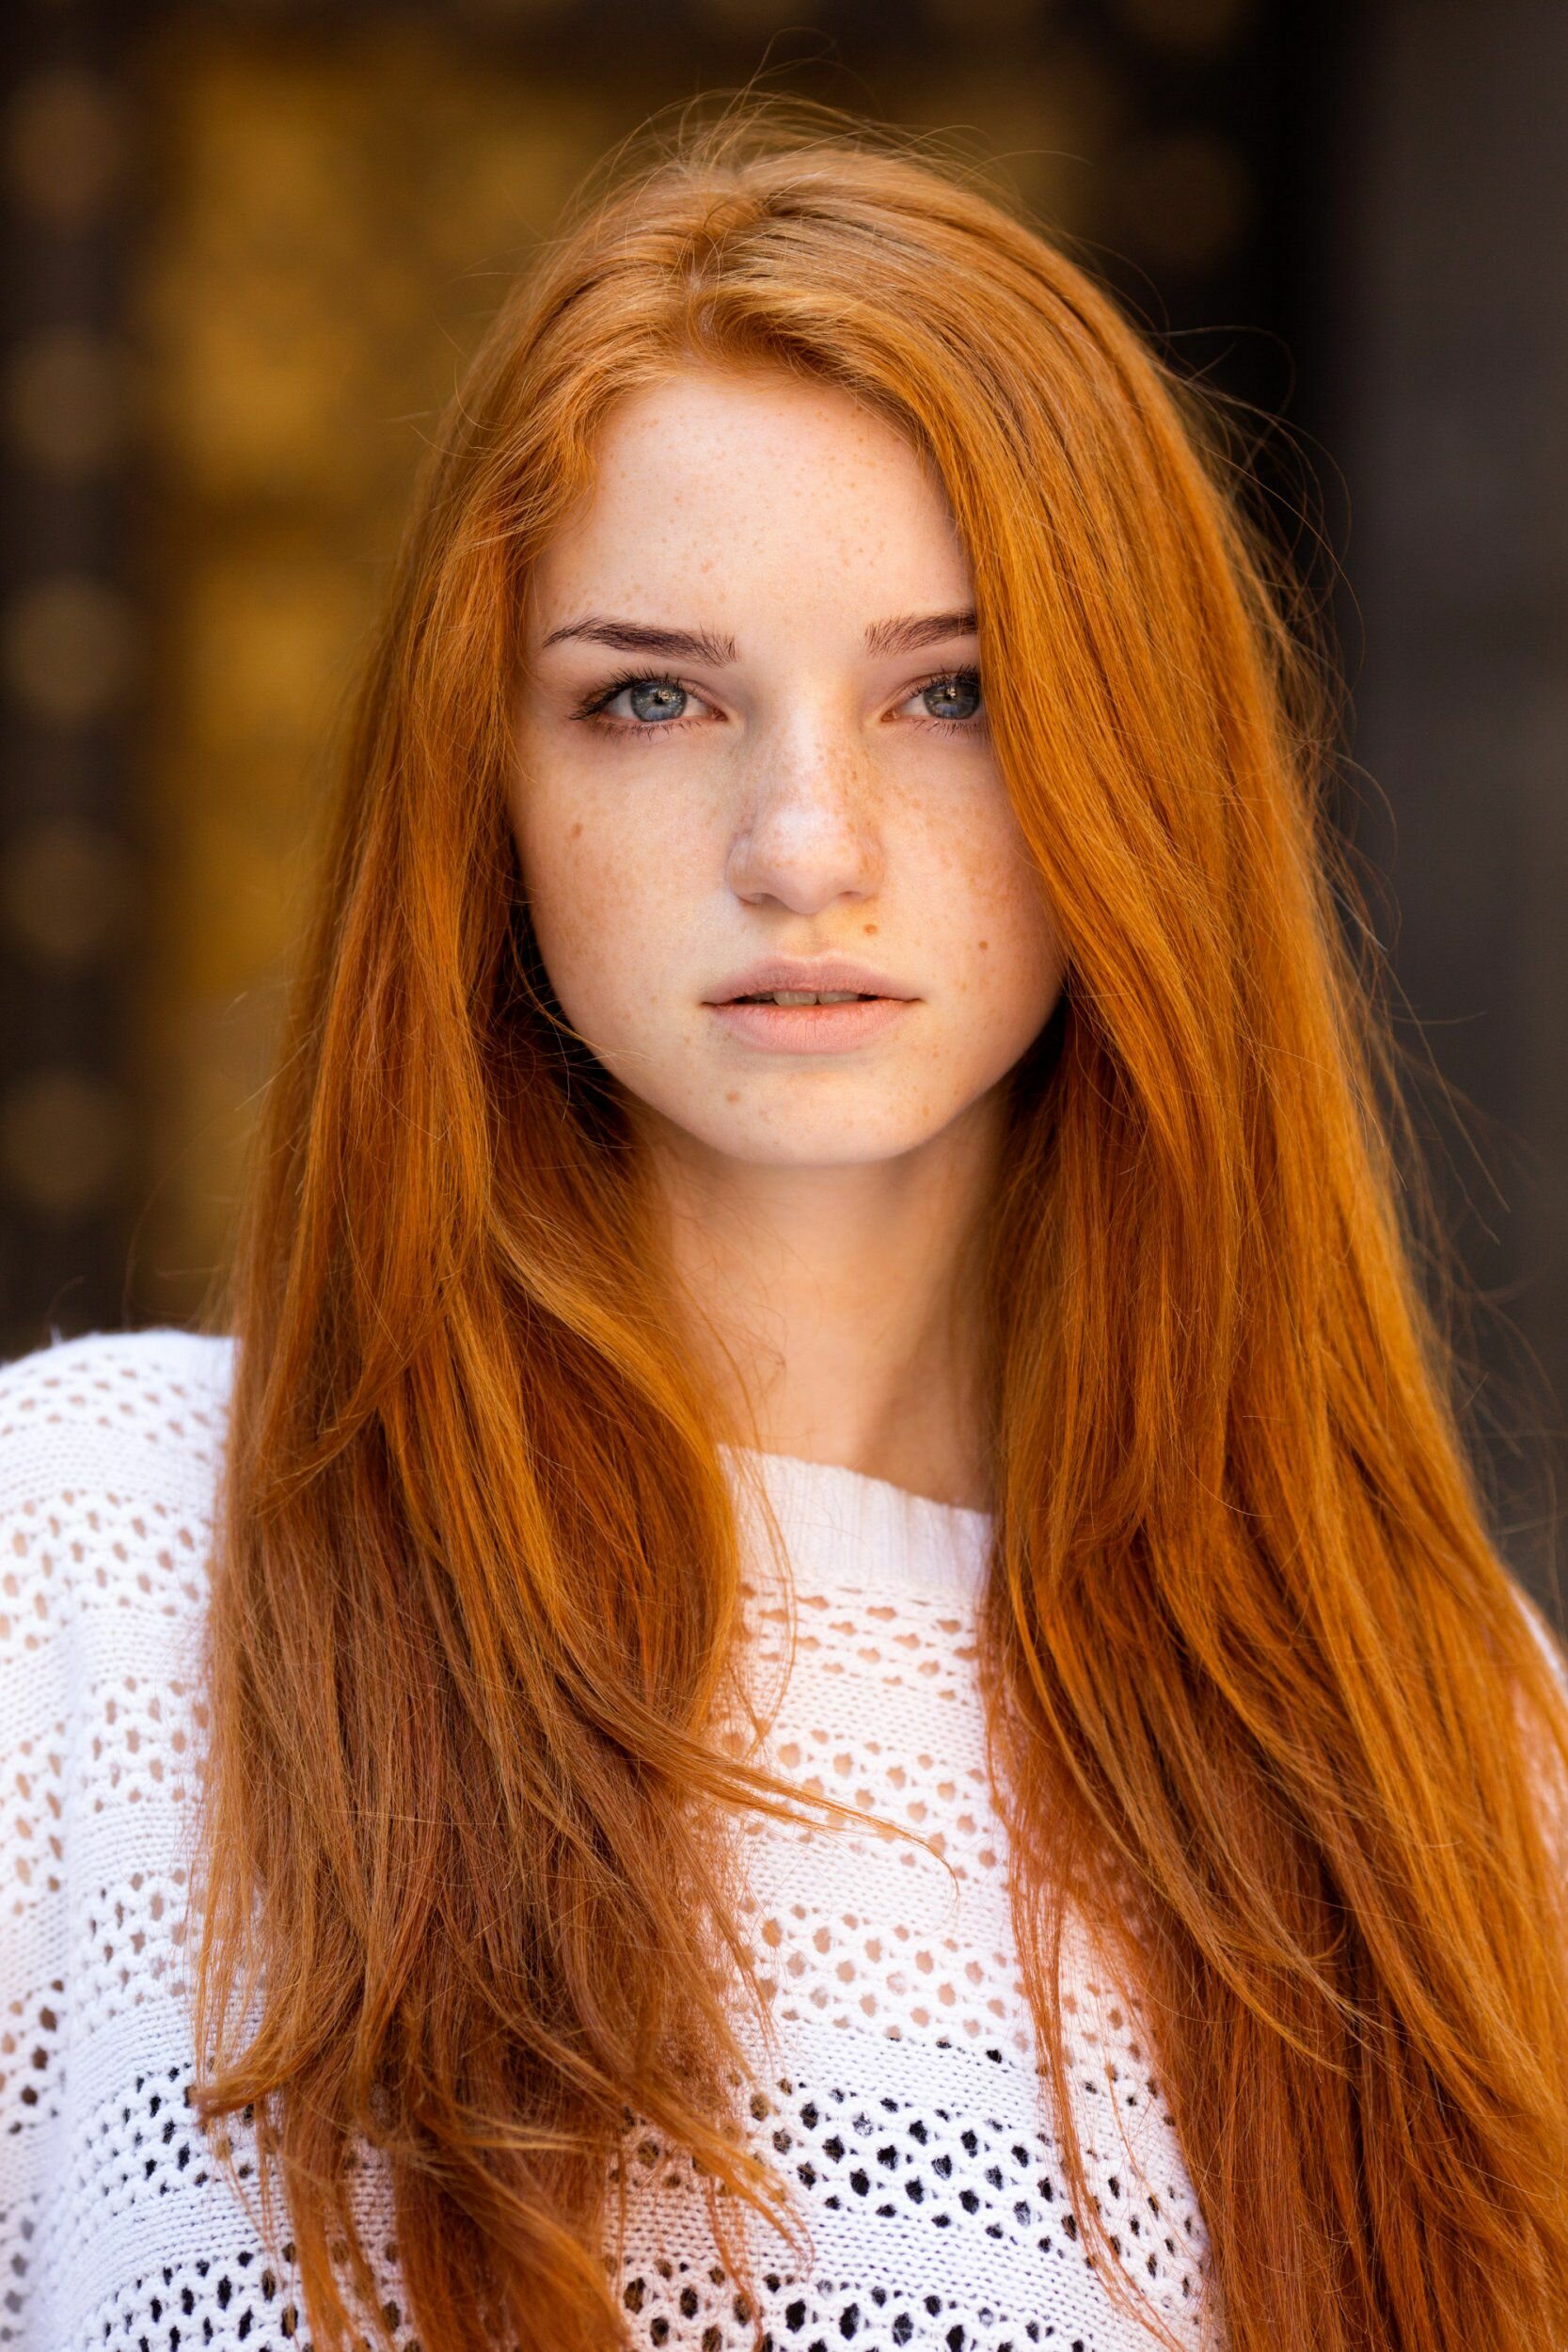 Young nn models redhead freckles